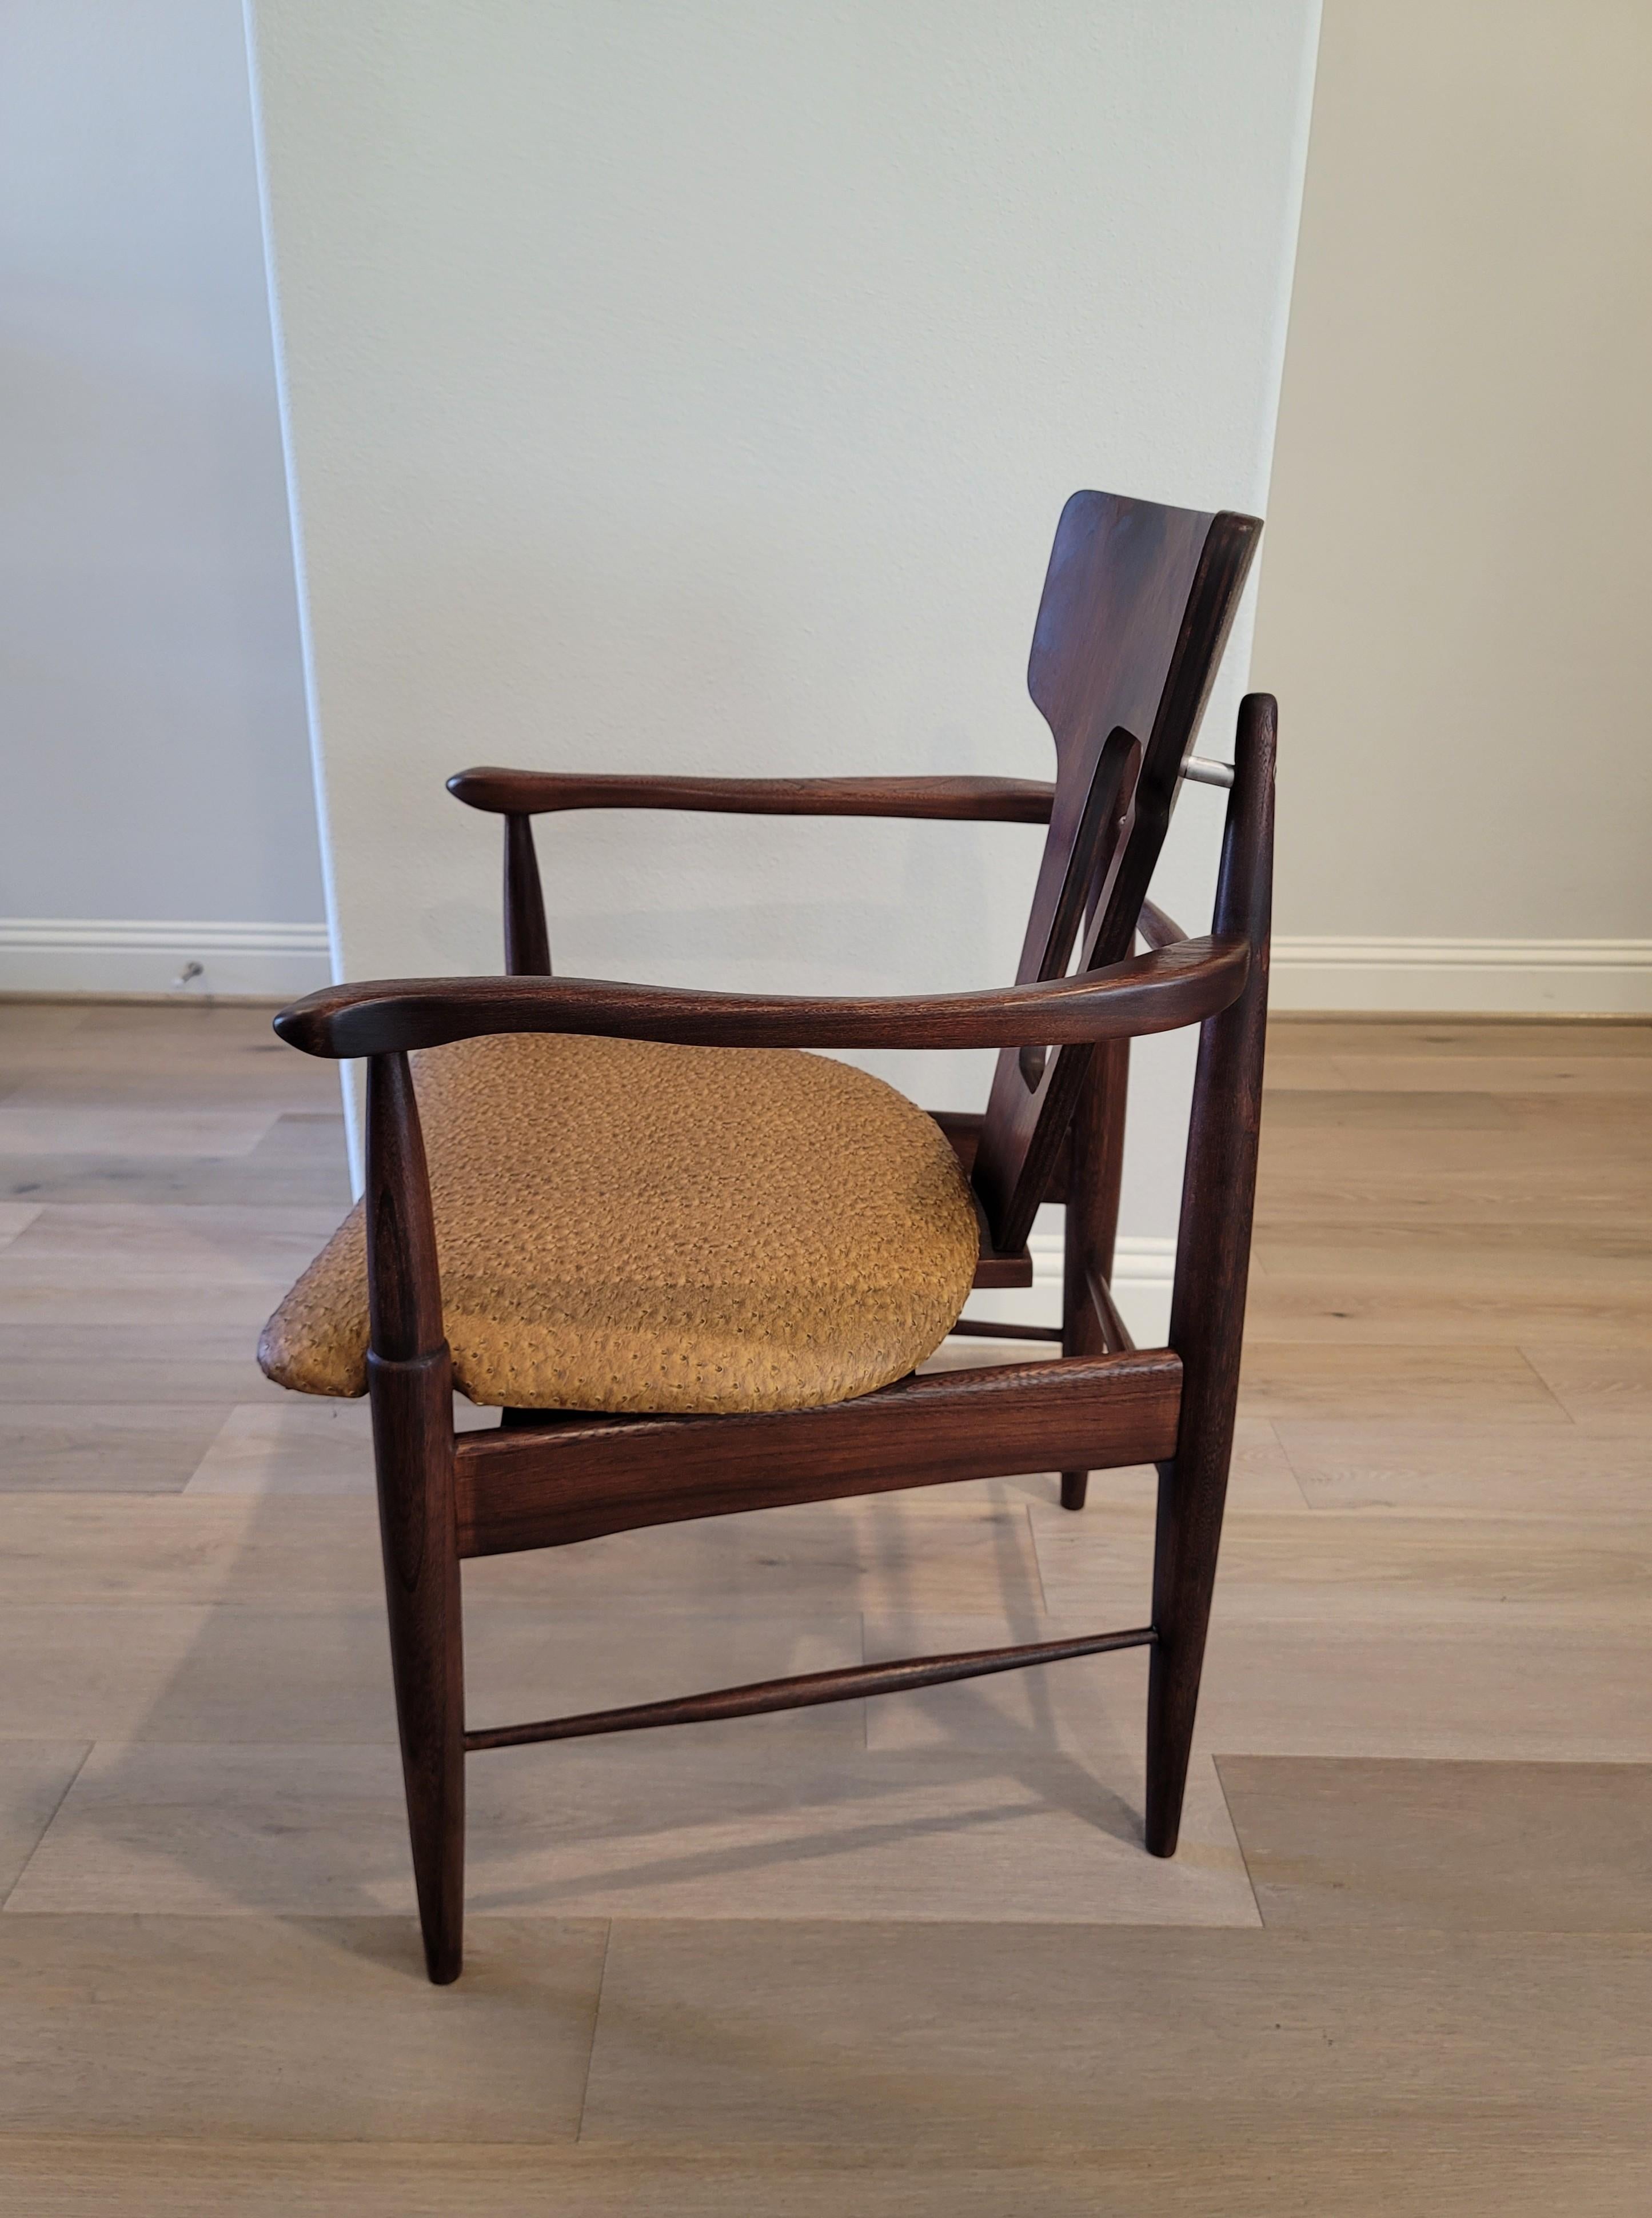 Mid-Century Modern Teak Chair with Ostrich Upholstery  In Excellent Condition For Sale In Forney, TX